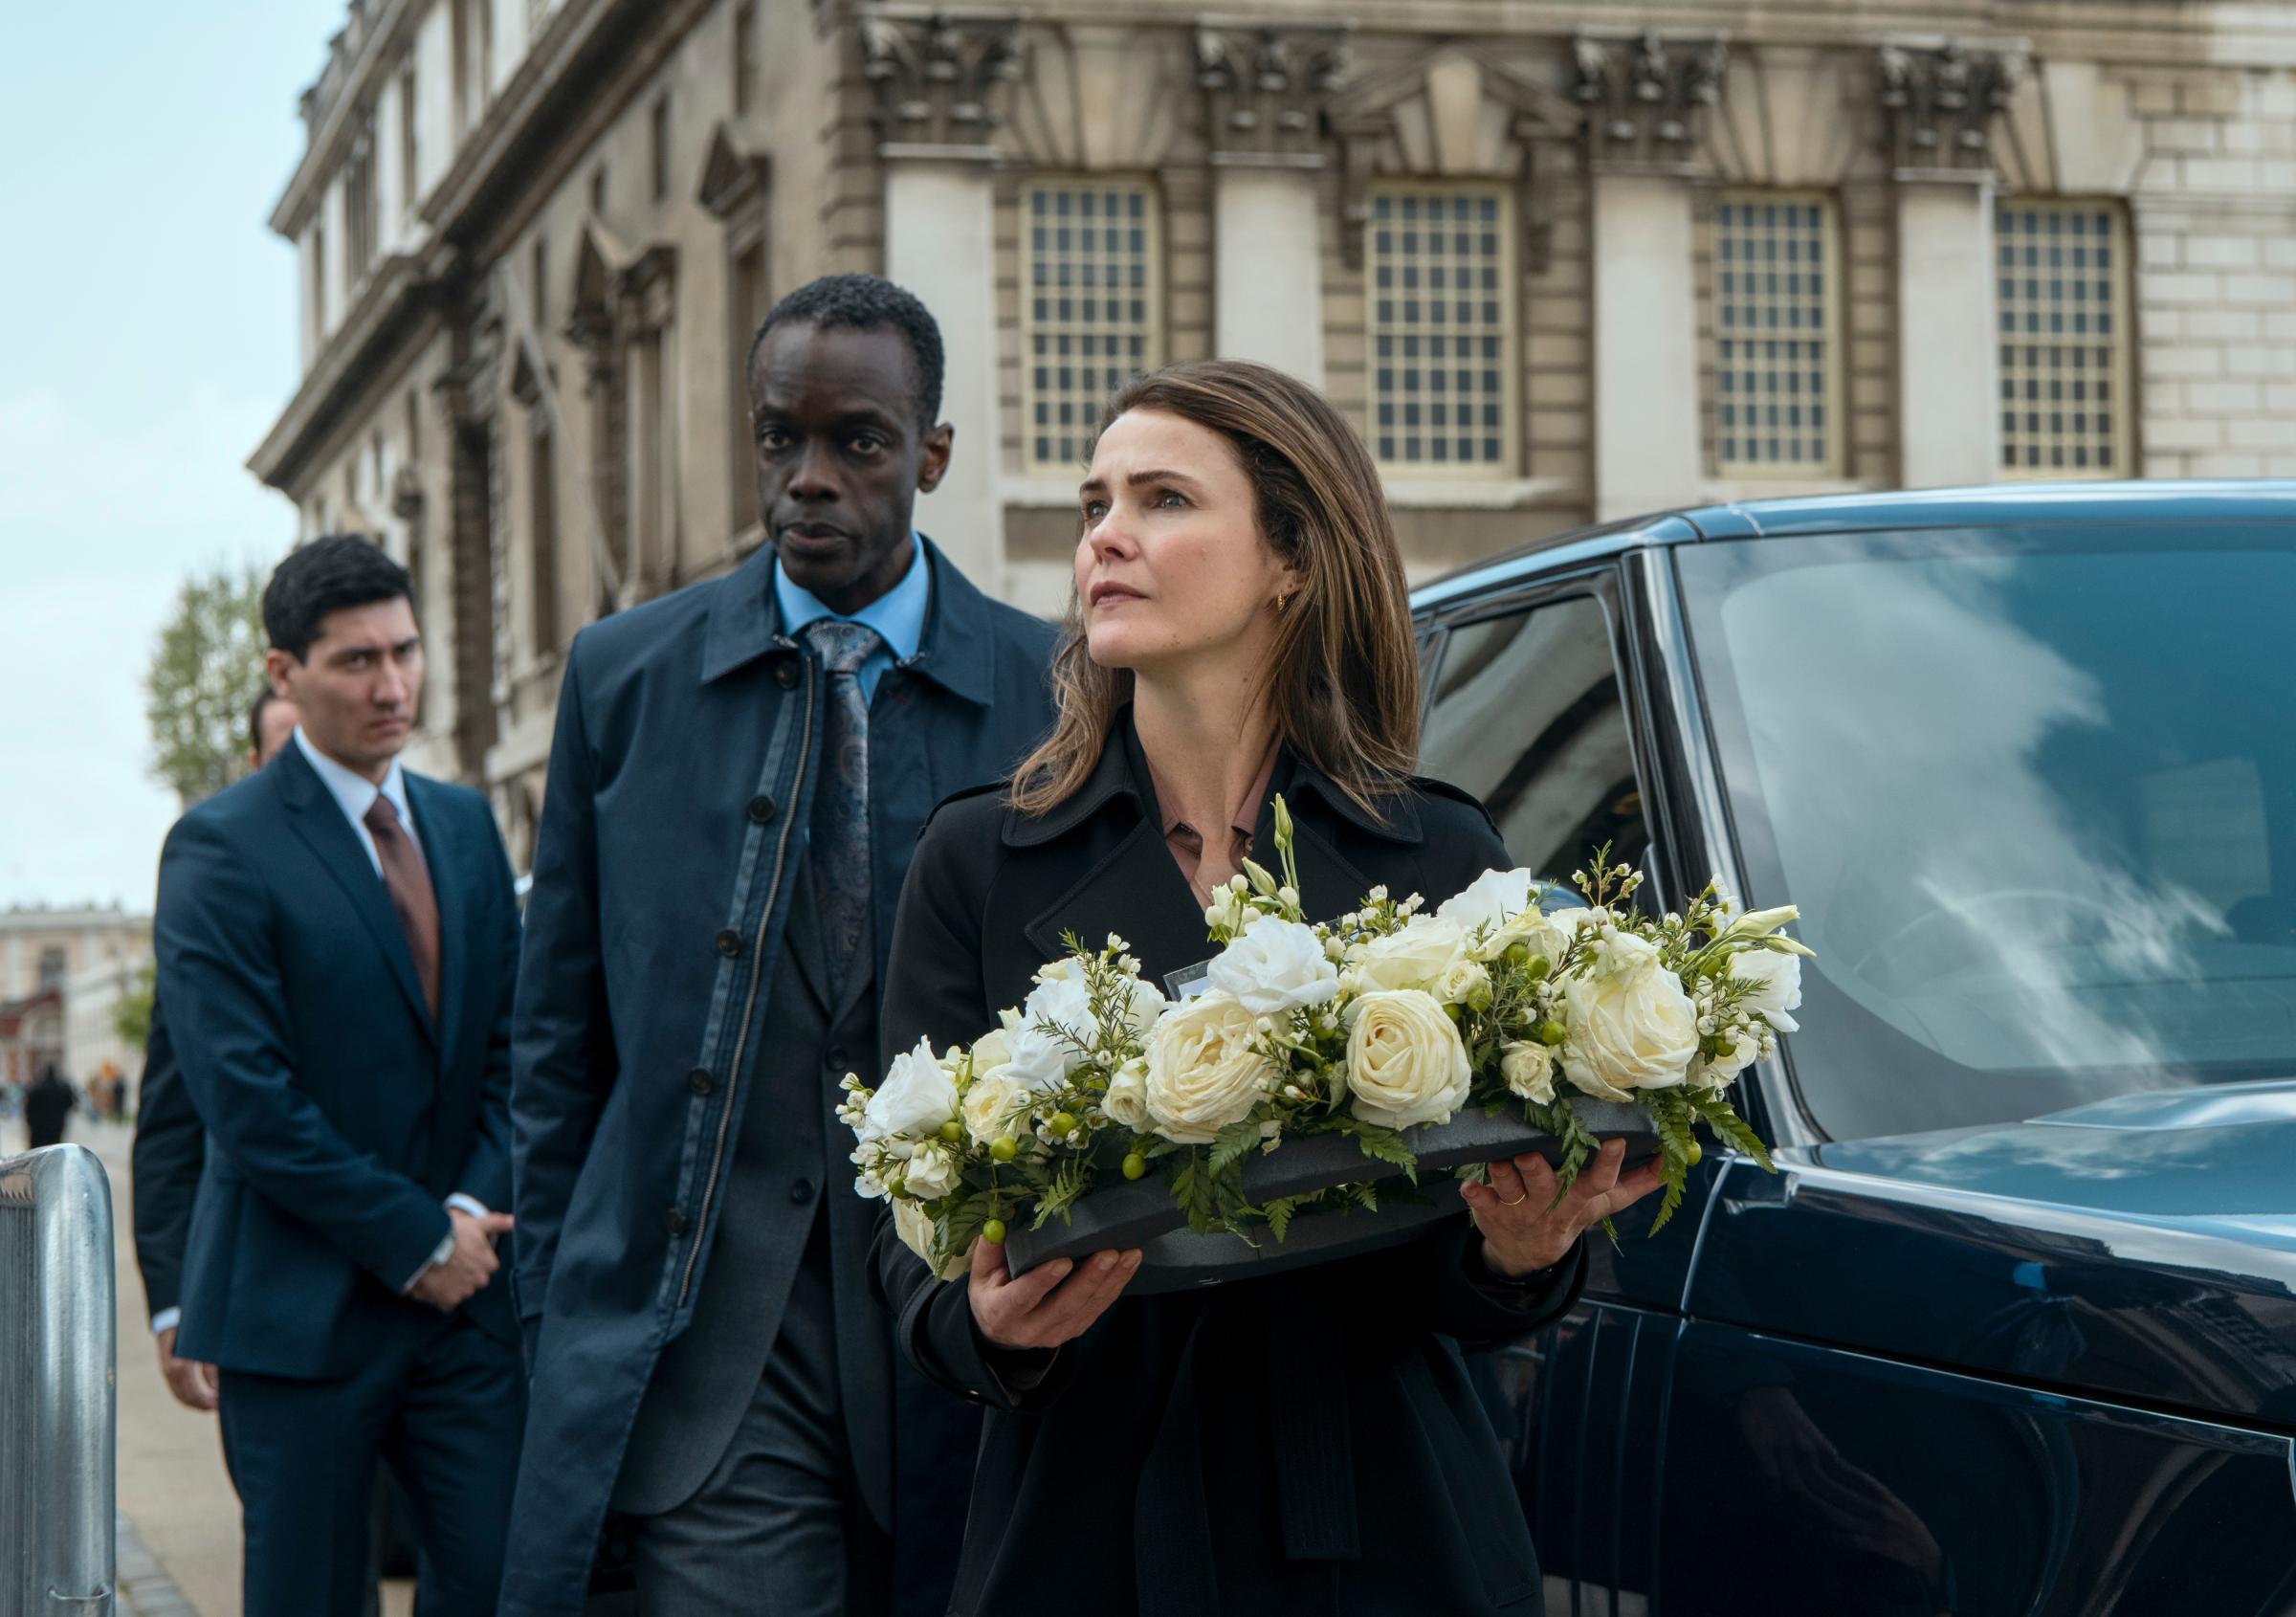 The Diplomat. (L to R) Kenichiro Thomson as Martin, Ato Essandoh as Stuart Heyford, Keri Russell as Kate Wyler in episode 101 of The Diplomat. Cr. Alex Bailey/Netflix © 2023